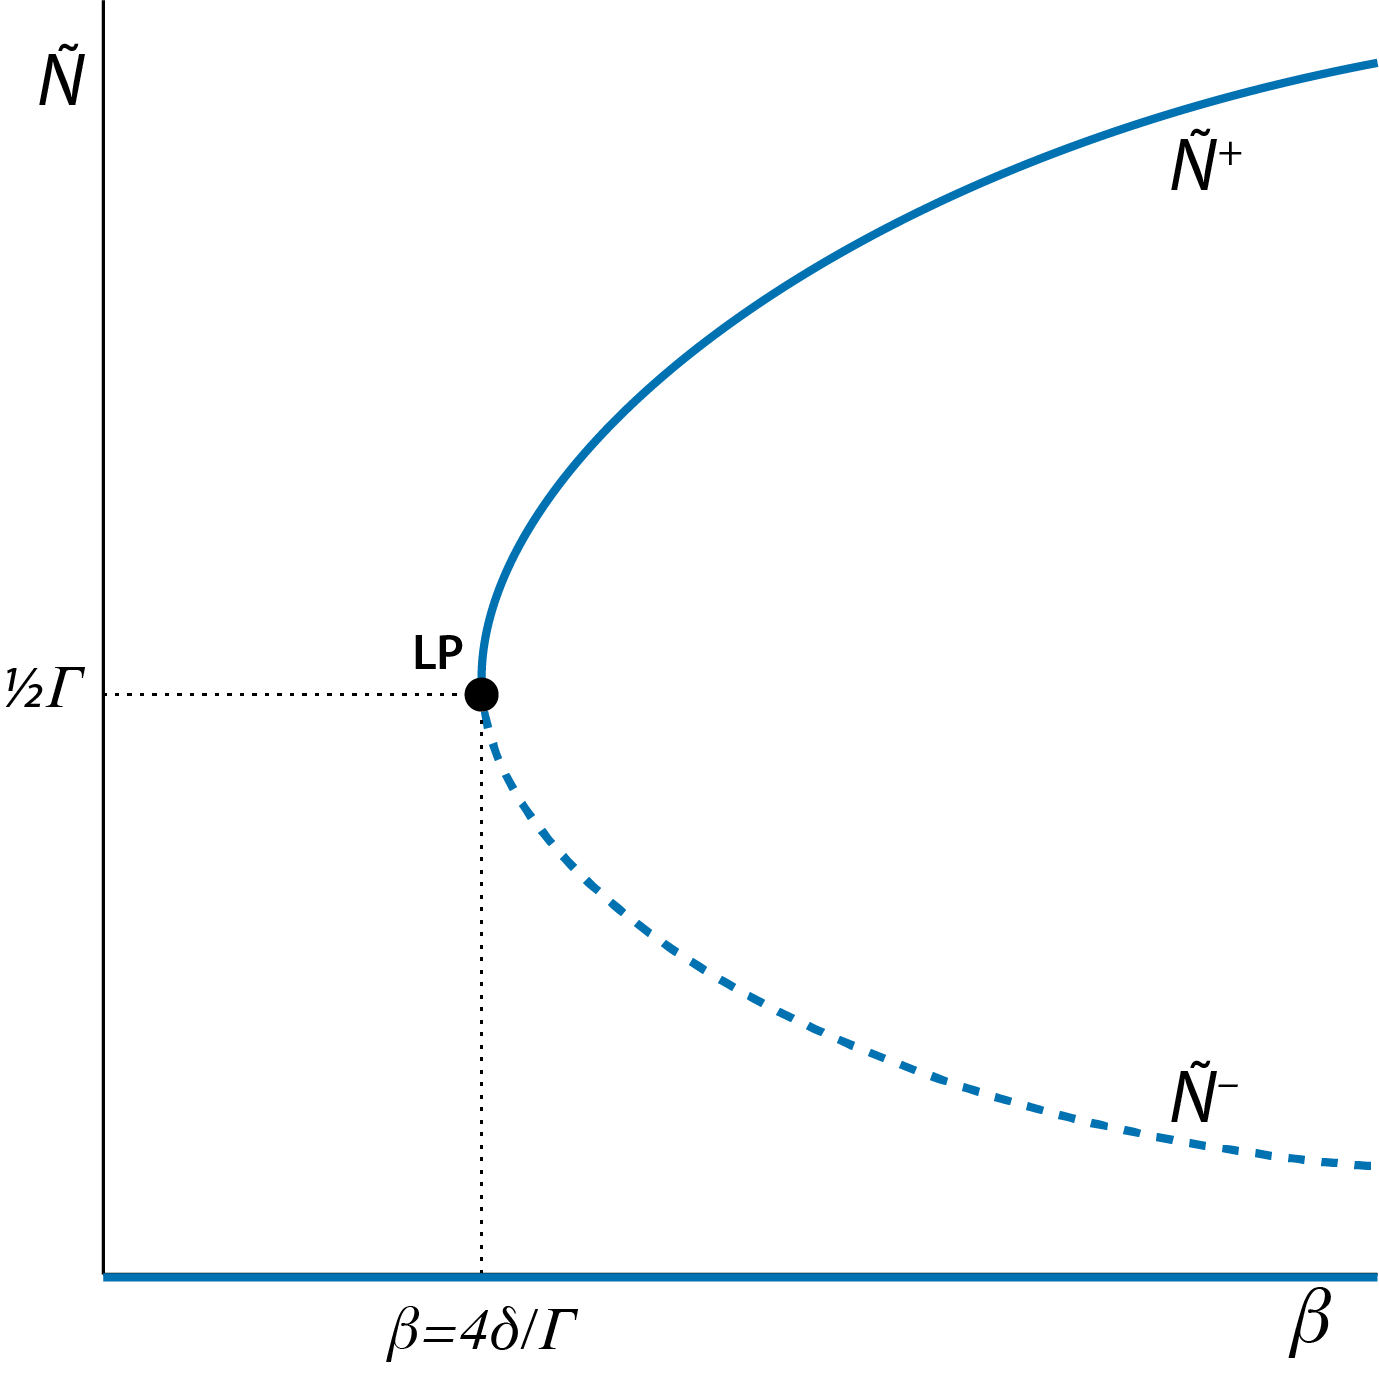 Bifurcation graph of the tow-sexes population model, showing the dependence of the steady state values $\tilde{N}$ of the model as a function of the model parameter $\beta$. Curve sections representing unstable steady states (saddle points) are indicated with dashed lines, curve sections representing stable steady states are indicated with solid lines. The special point indicated with 'LP', occurring at $\beta=4\delta/\Gamma$ with $\tilde{N}=\tfrac{1}{2}\Gamma$ is the limit point or saddle-node bifurcation point.